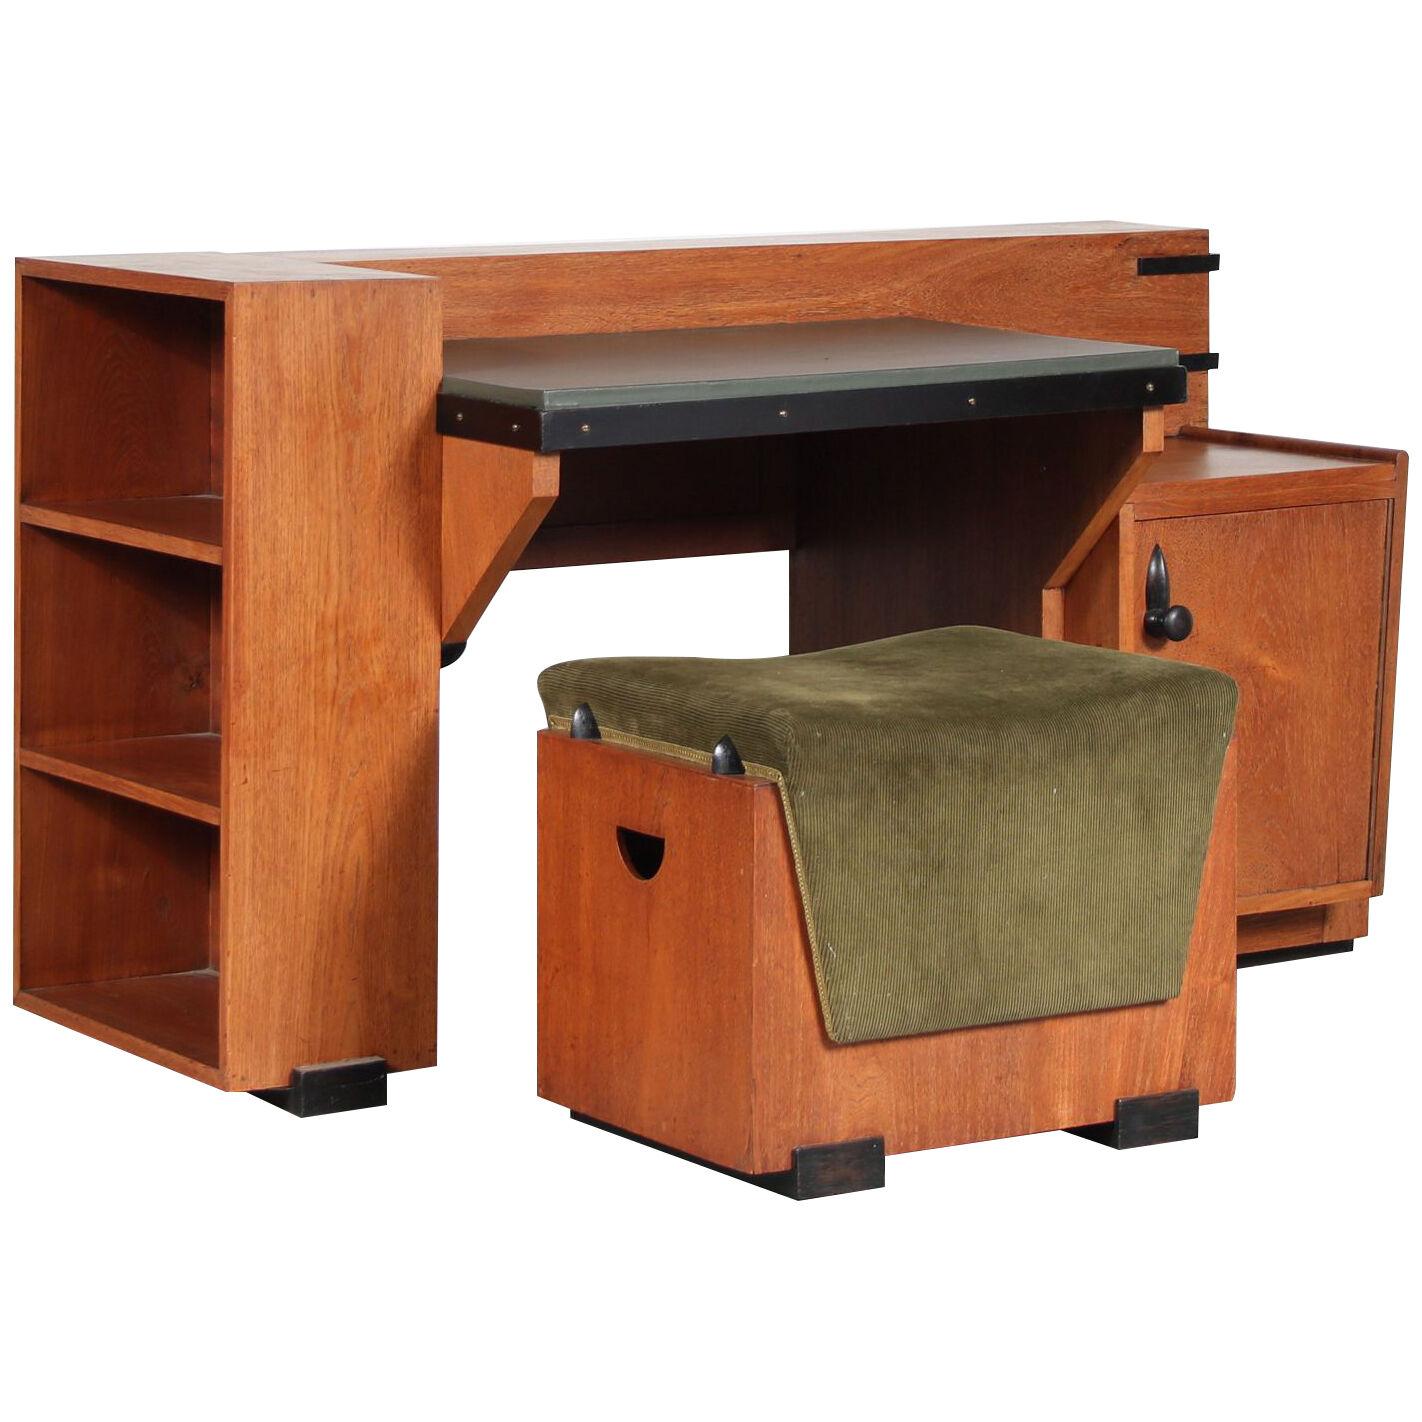 Colonial Haagse School Desk with Stool, Indonesia 1930